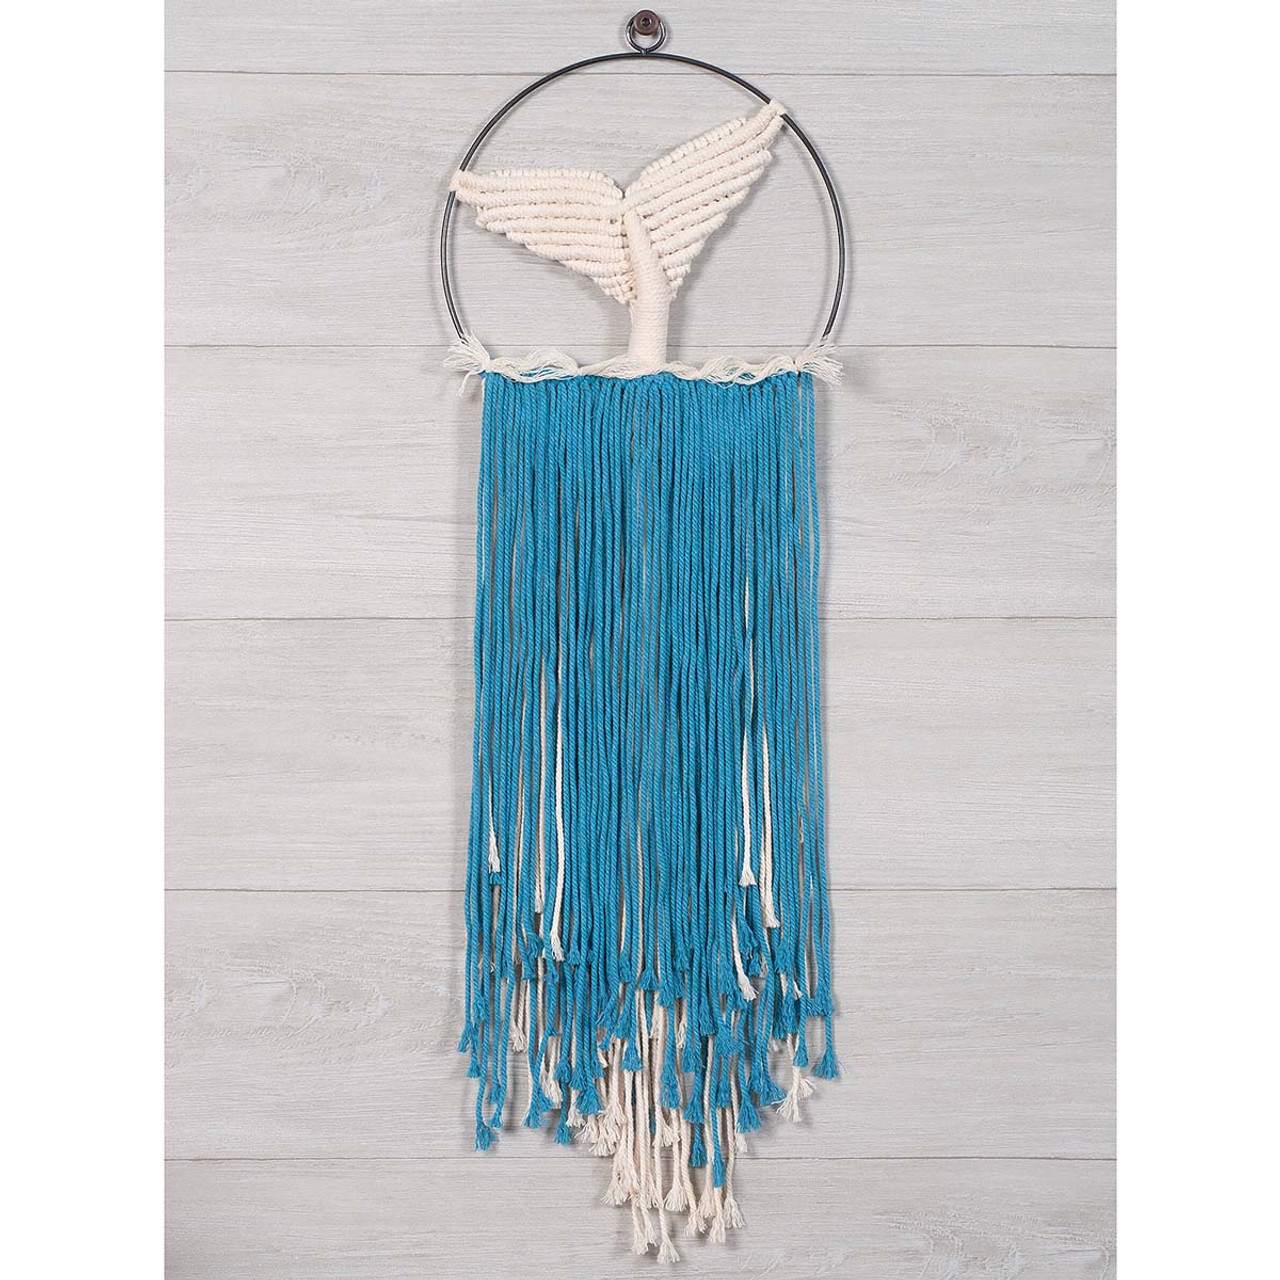 Herrschners Into the Woods Wall Hanging Macrame